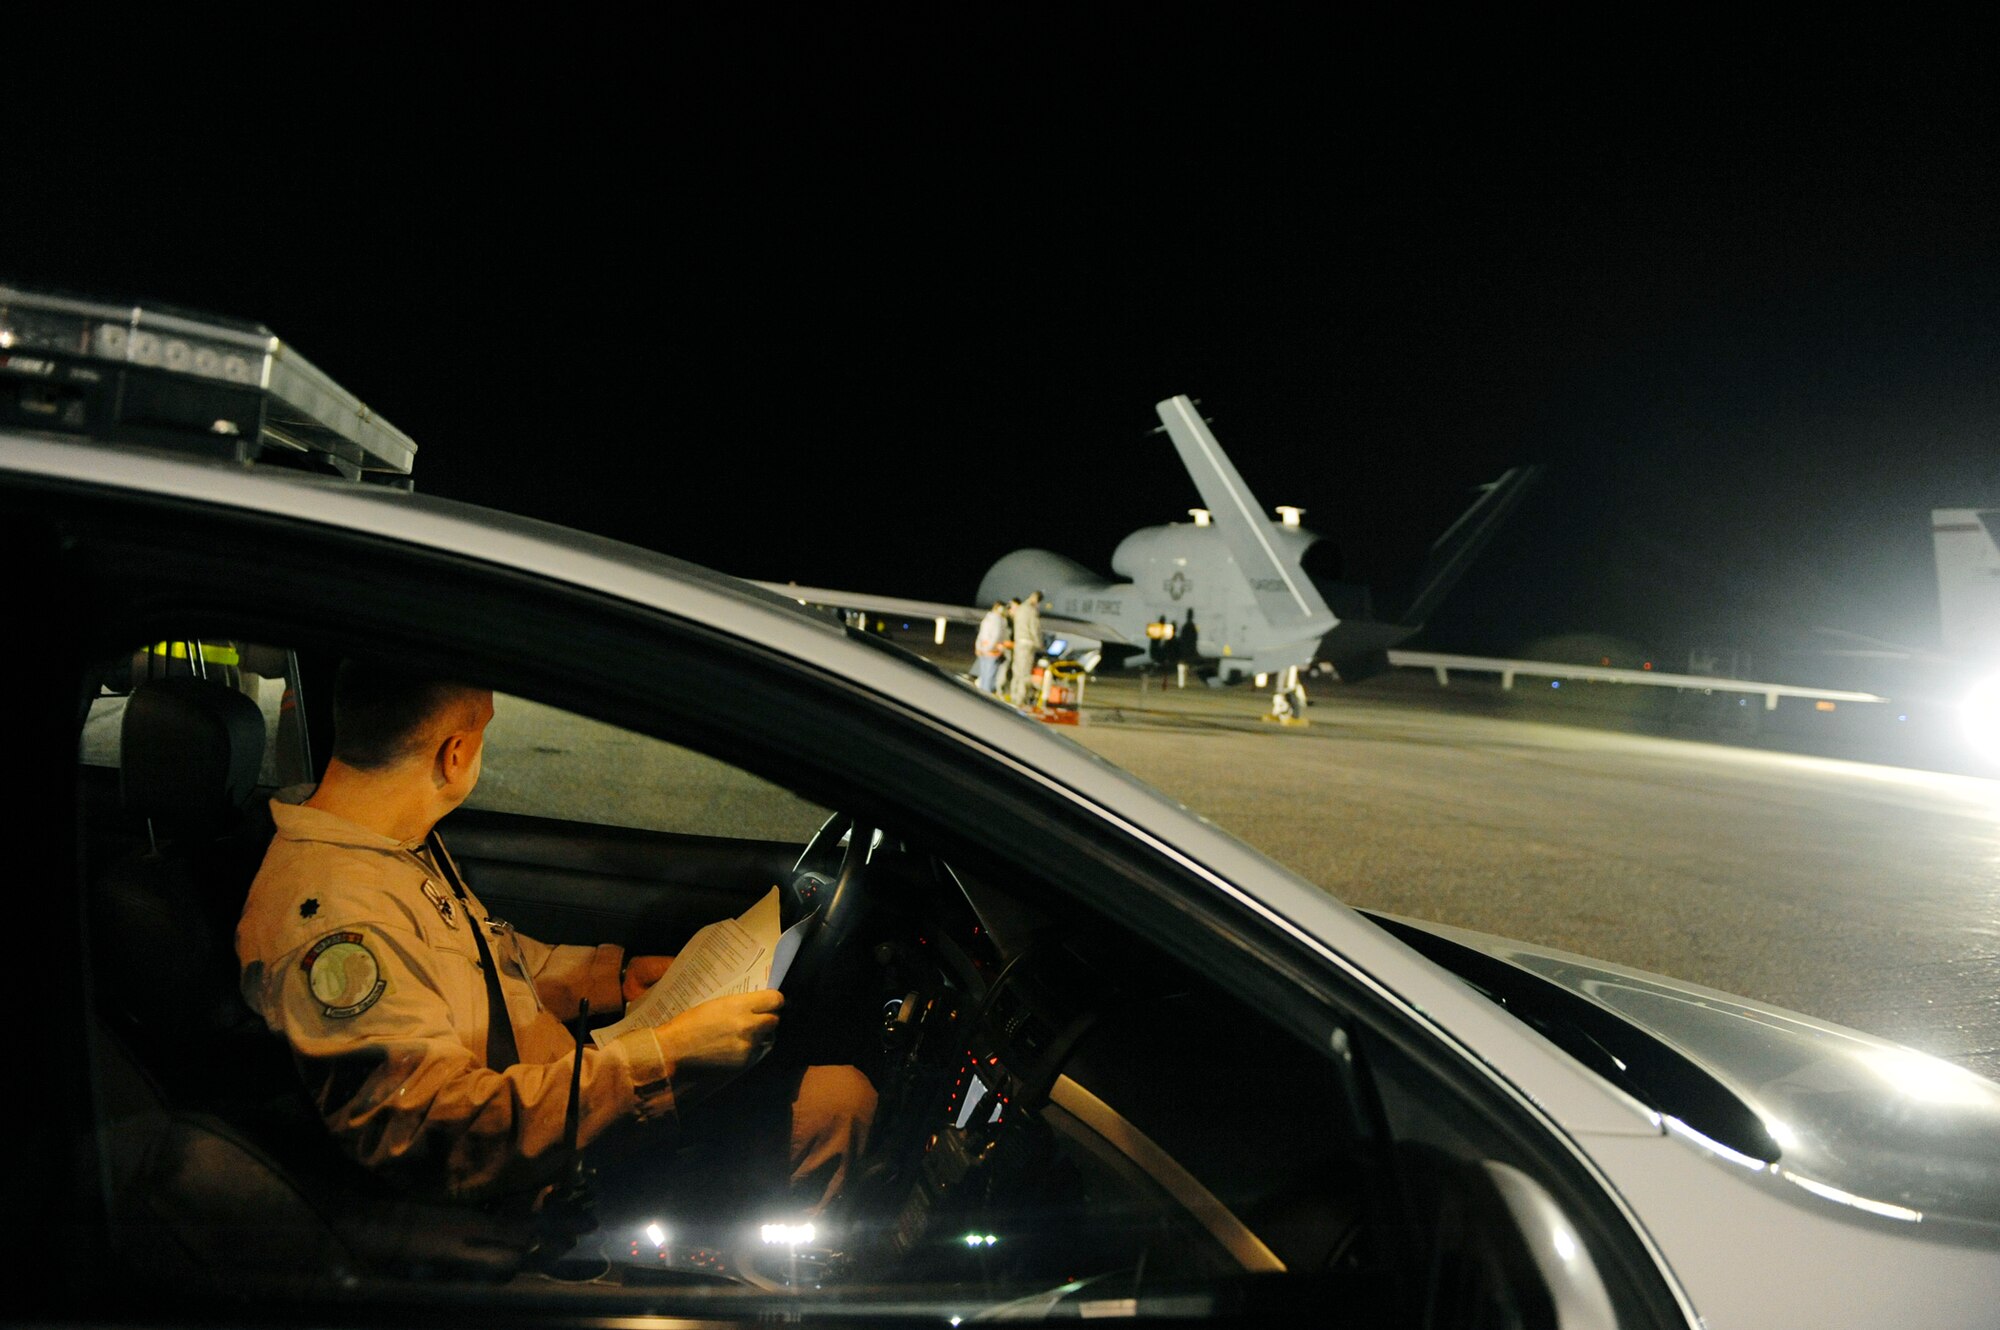 A lieutenant colonel from the 99th Expeditionary Reconnaissance Squadron waits in his vehicle before an EQ-4 Global Hawk's first launch Nov. 29, 2010, in Southwest Asia. The EQ-4 and other Global Hawk platforms use a chase vehicle to ensure the aircraft takes off successfully. (U.S. Air Force photo/Staff Sgt. Eric Harris)